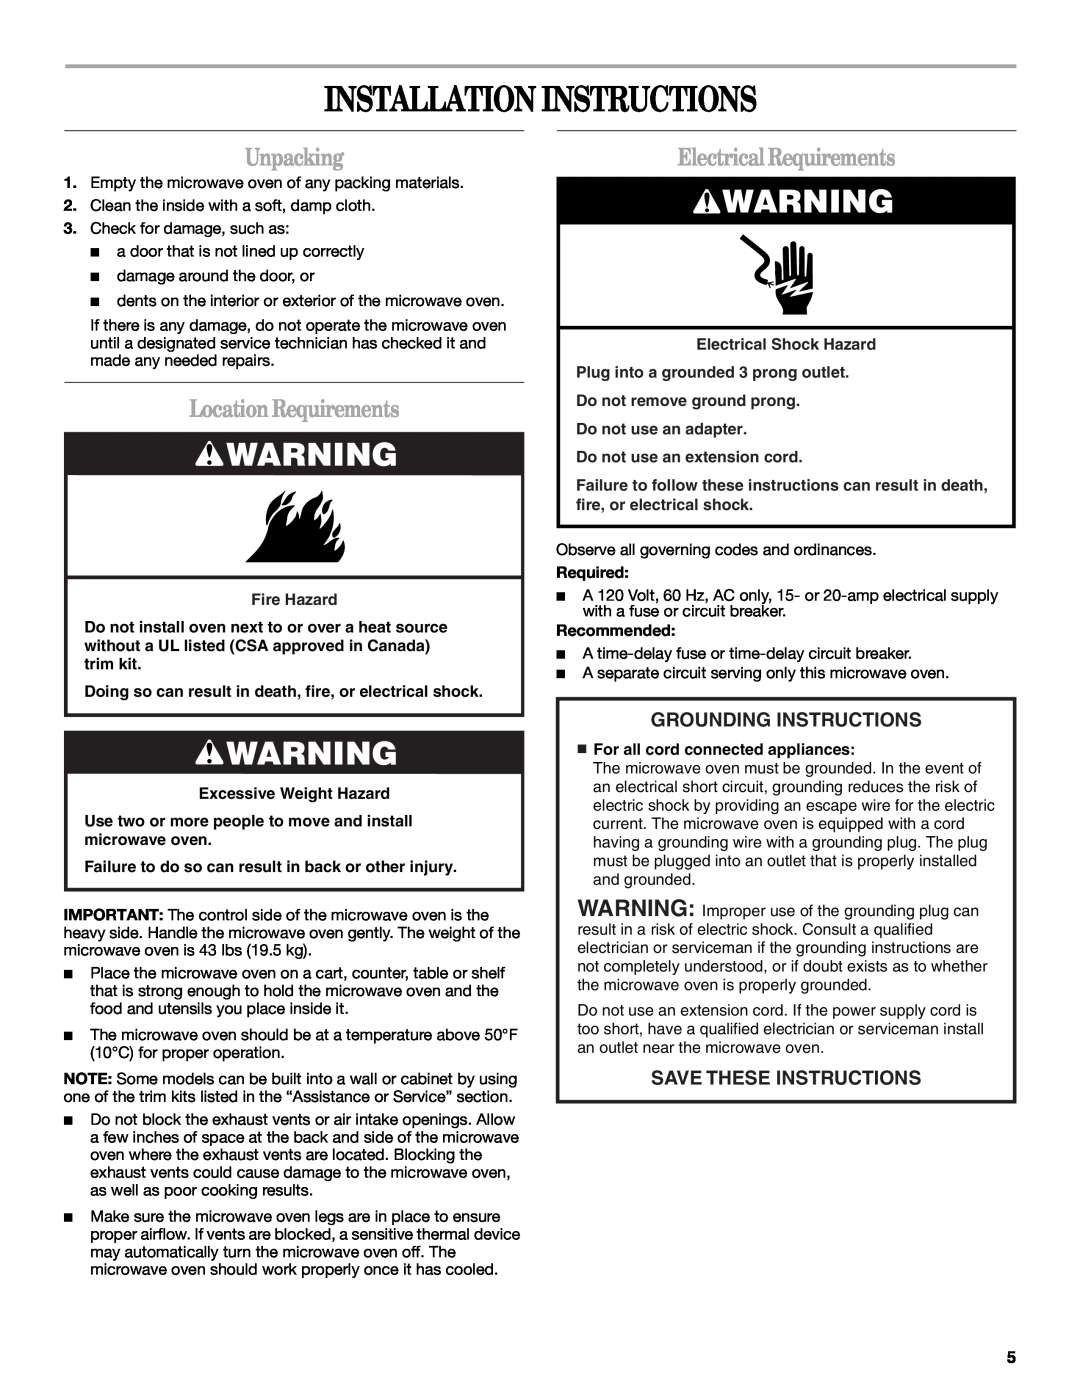 Whirlpool MT4110 Installation Instructions, Unpacking, LocationRequirements, ElectricalRequirements, Fire Hazard, Required 